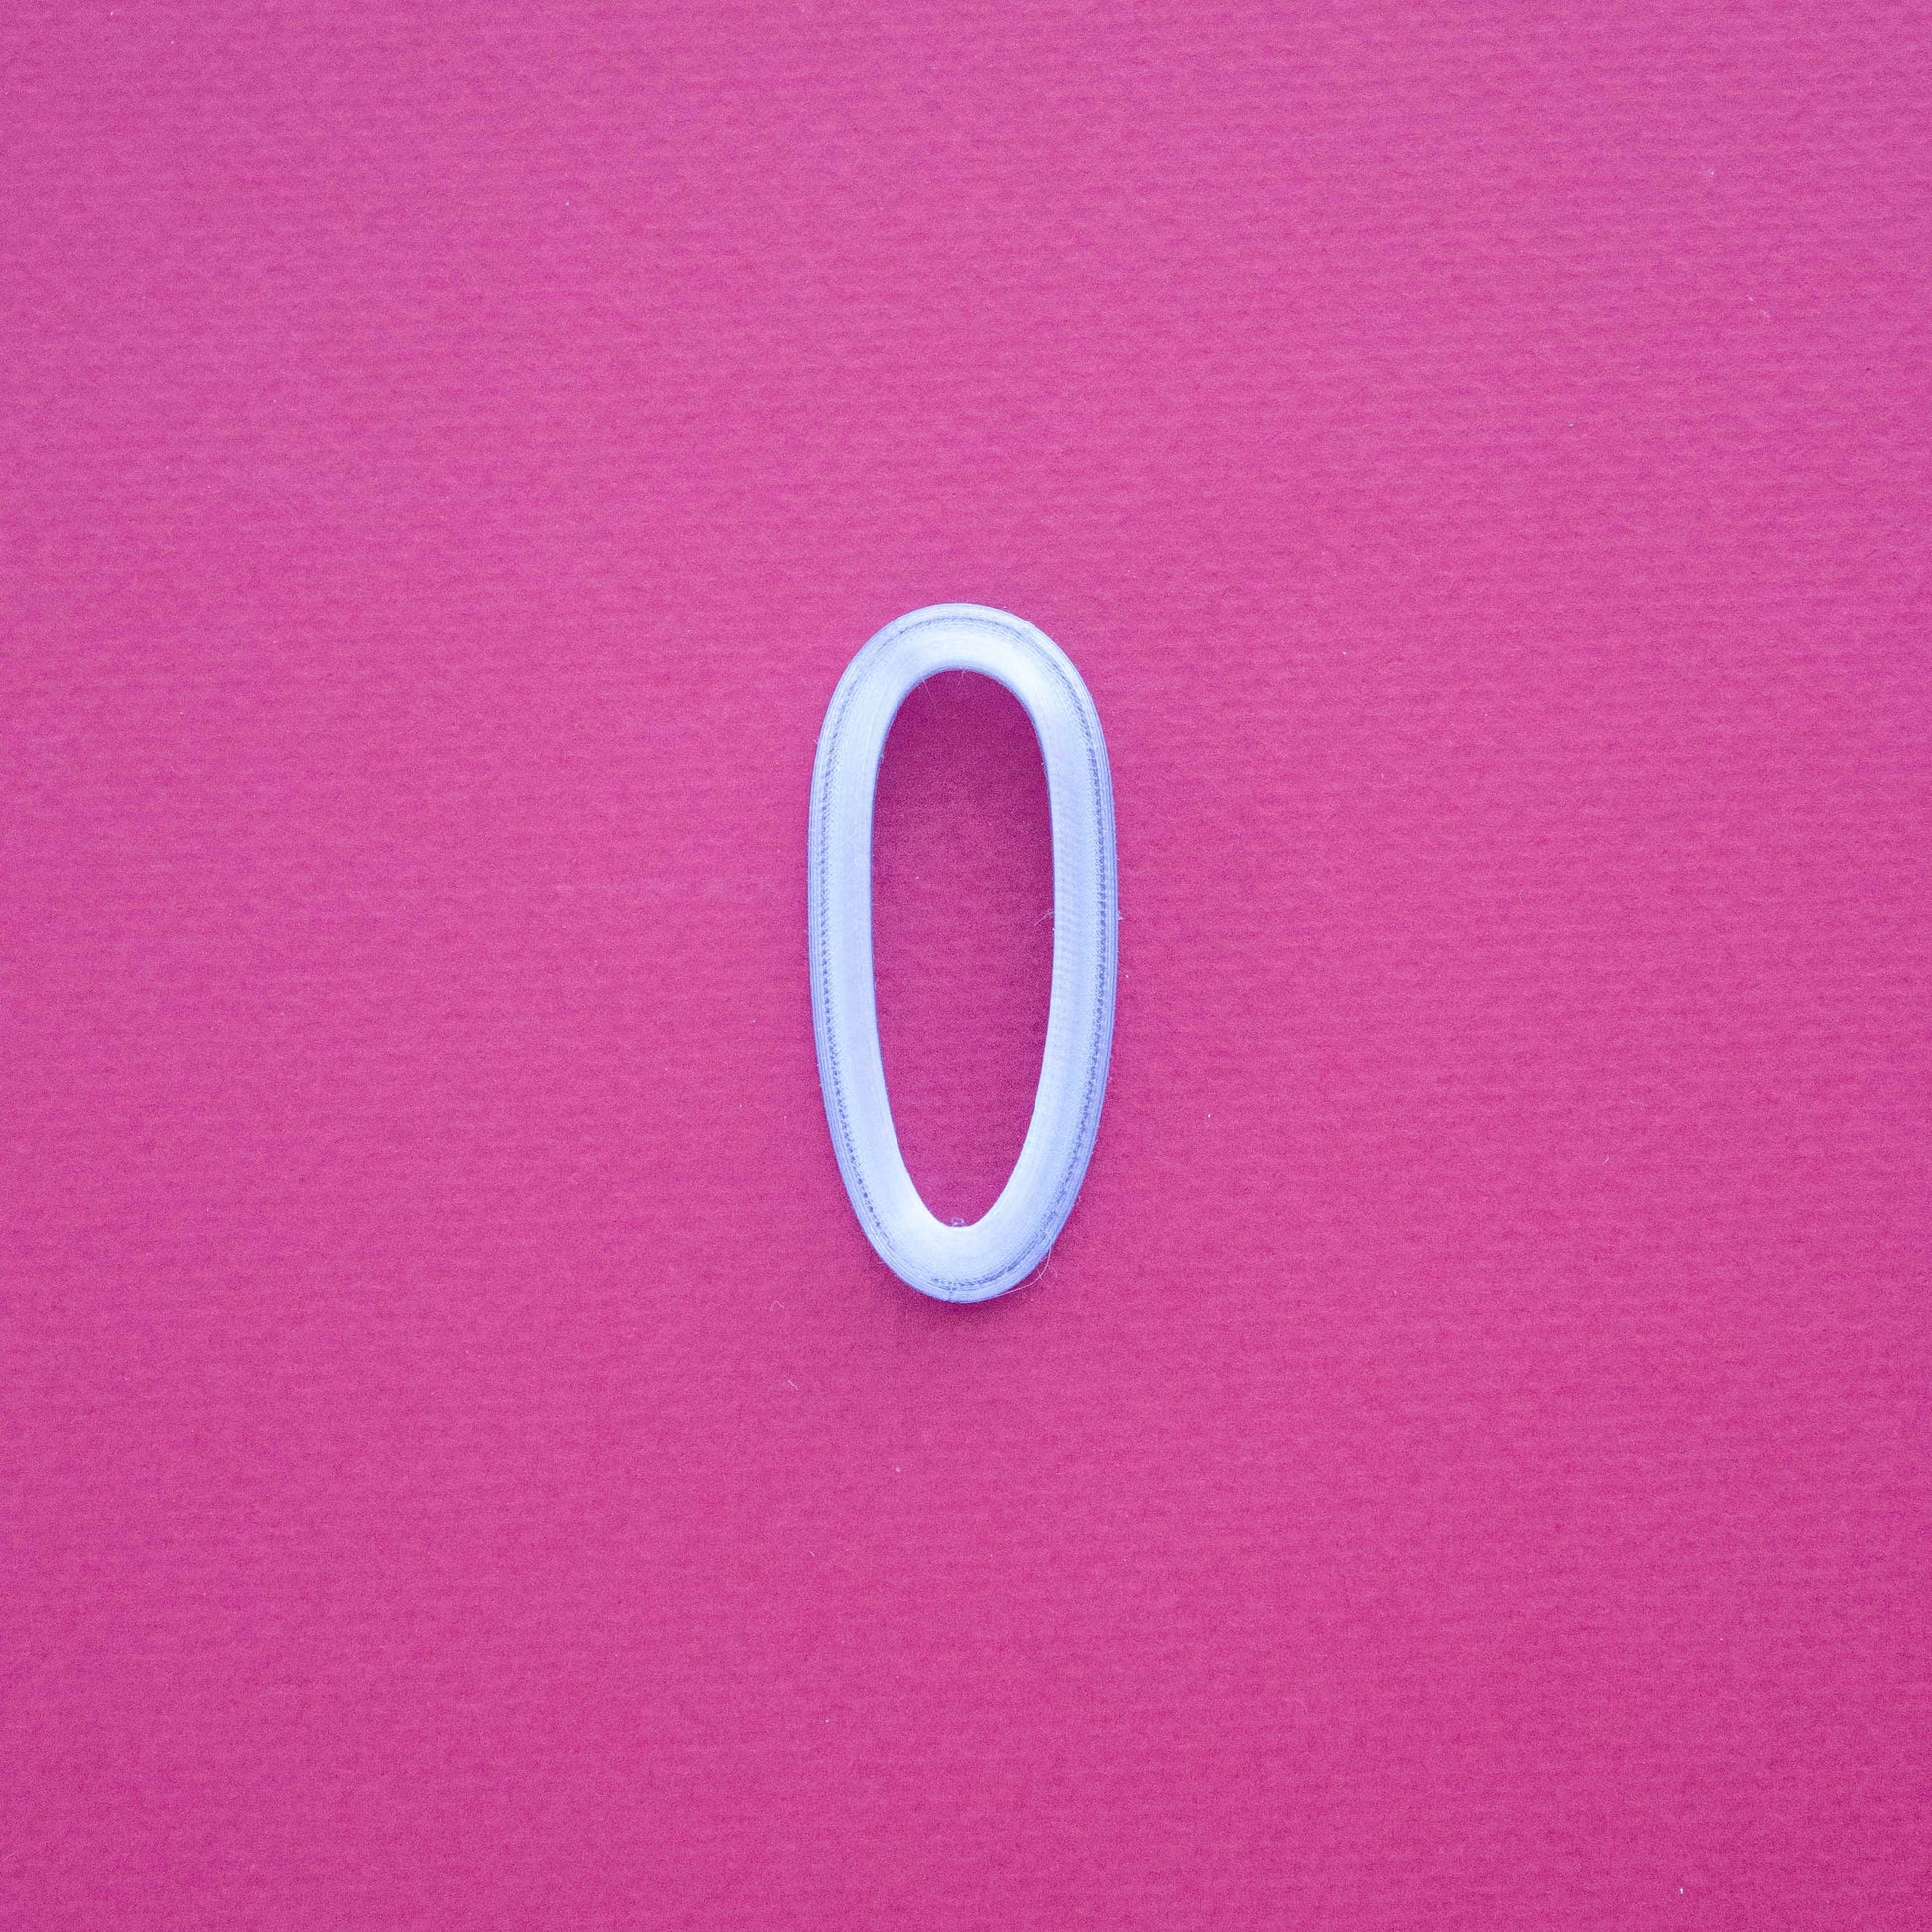 One stud polymer clay cutter on a pink background.